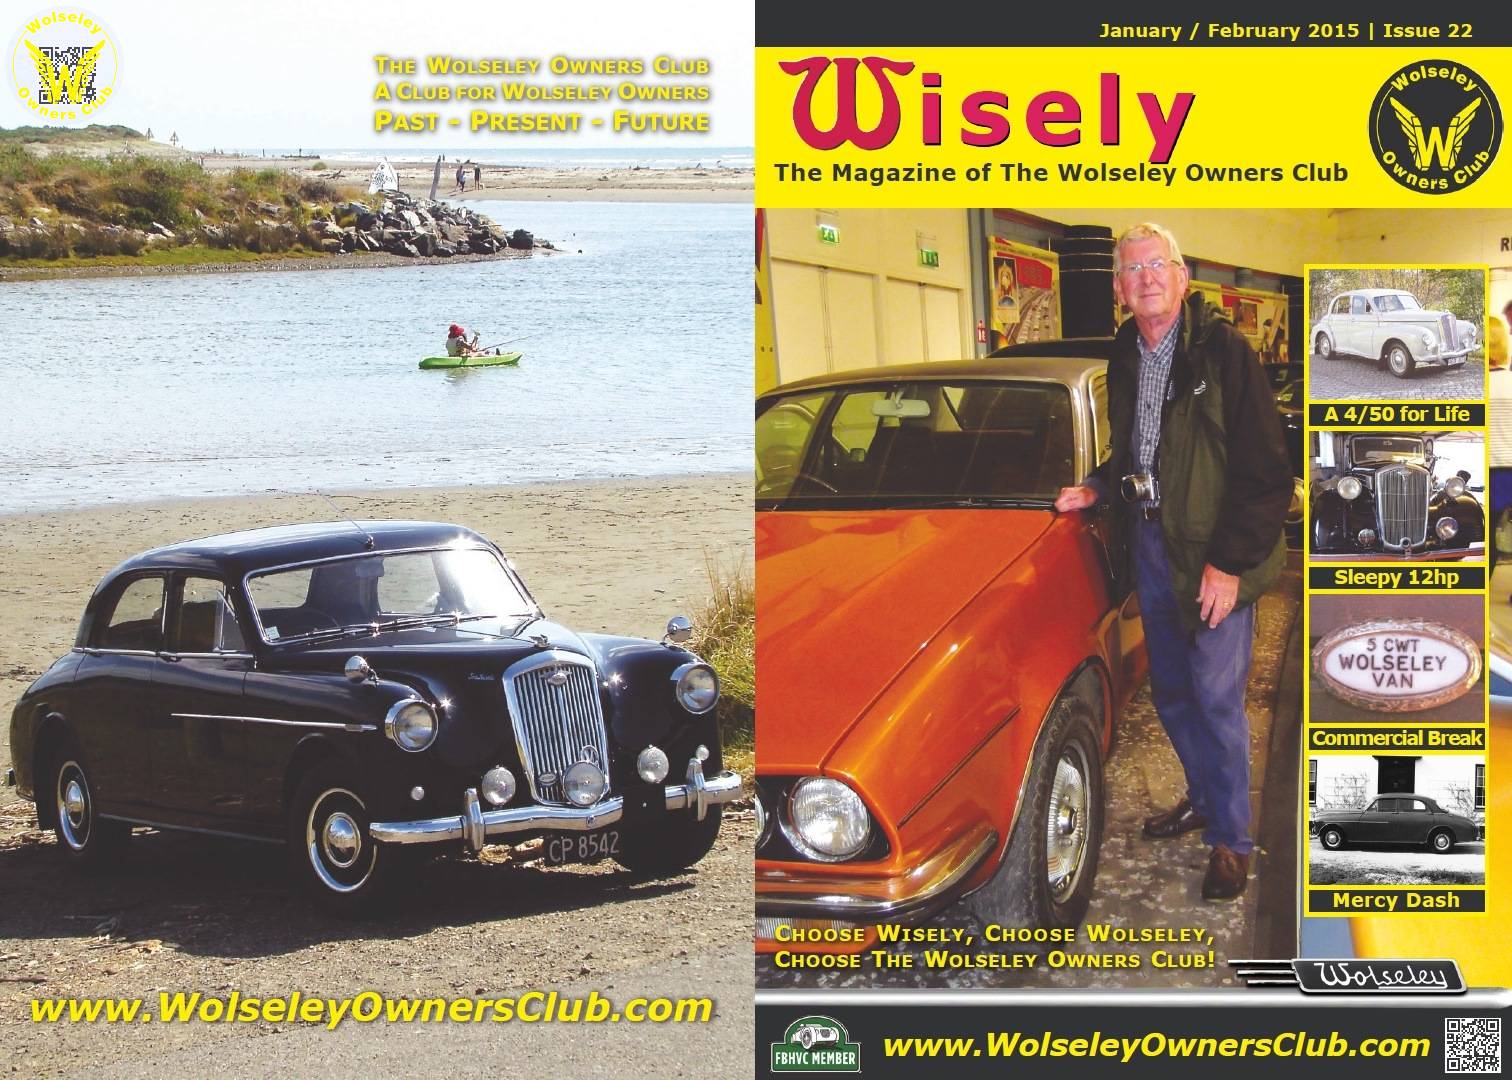 Wisely Issue 22